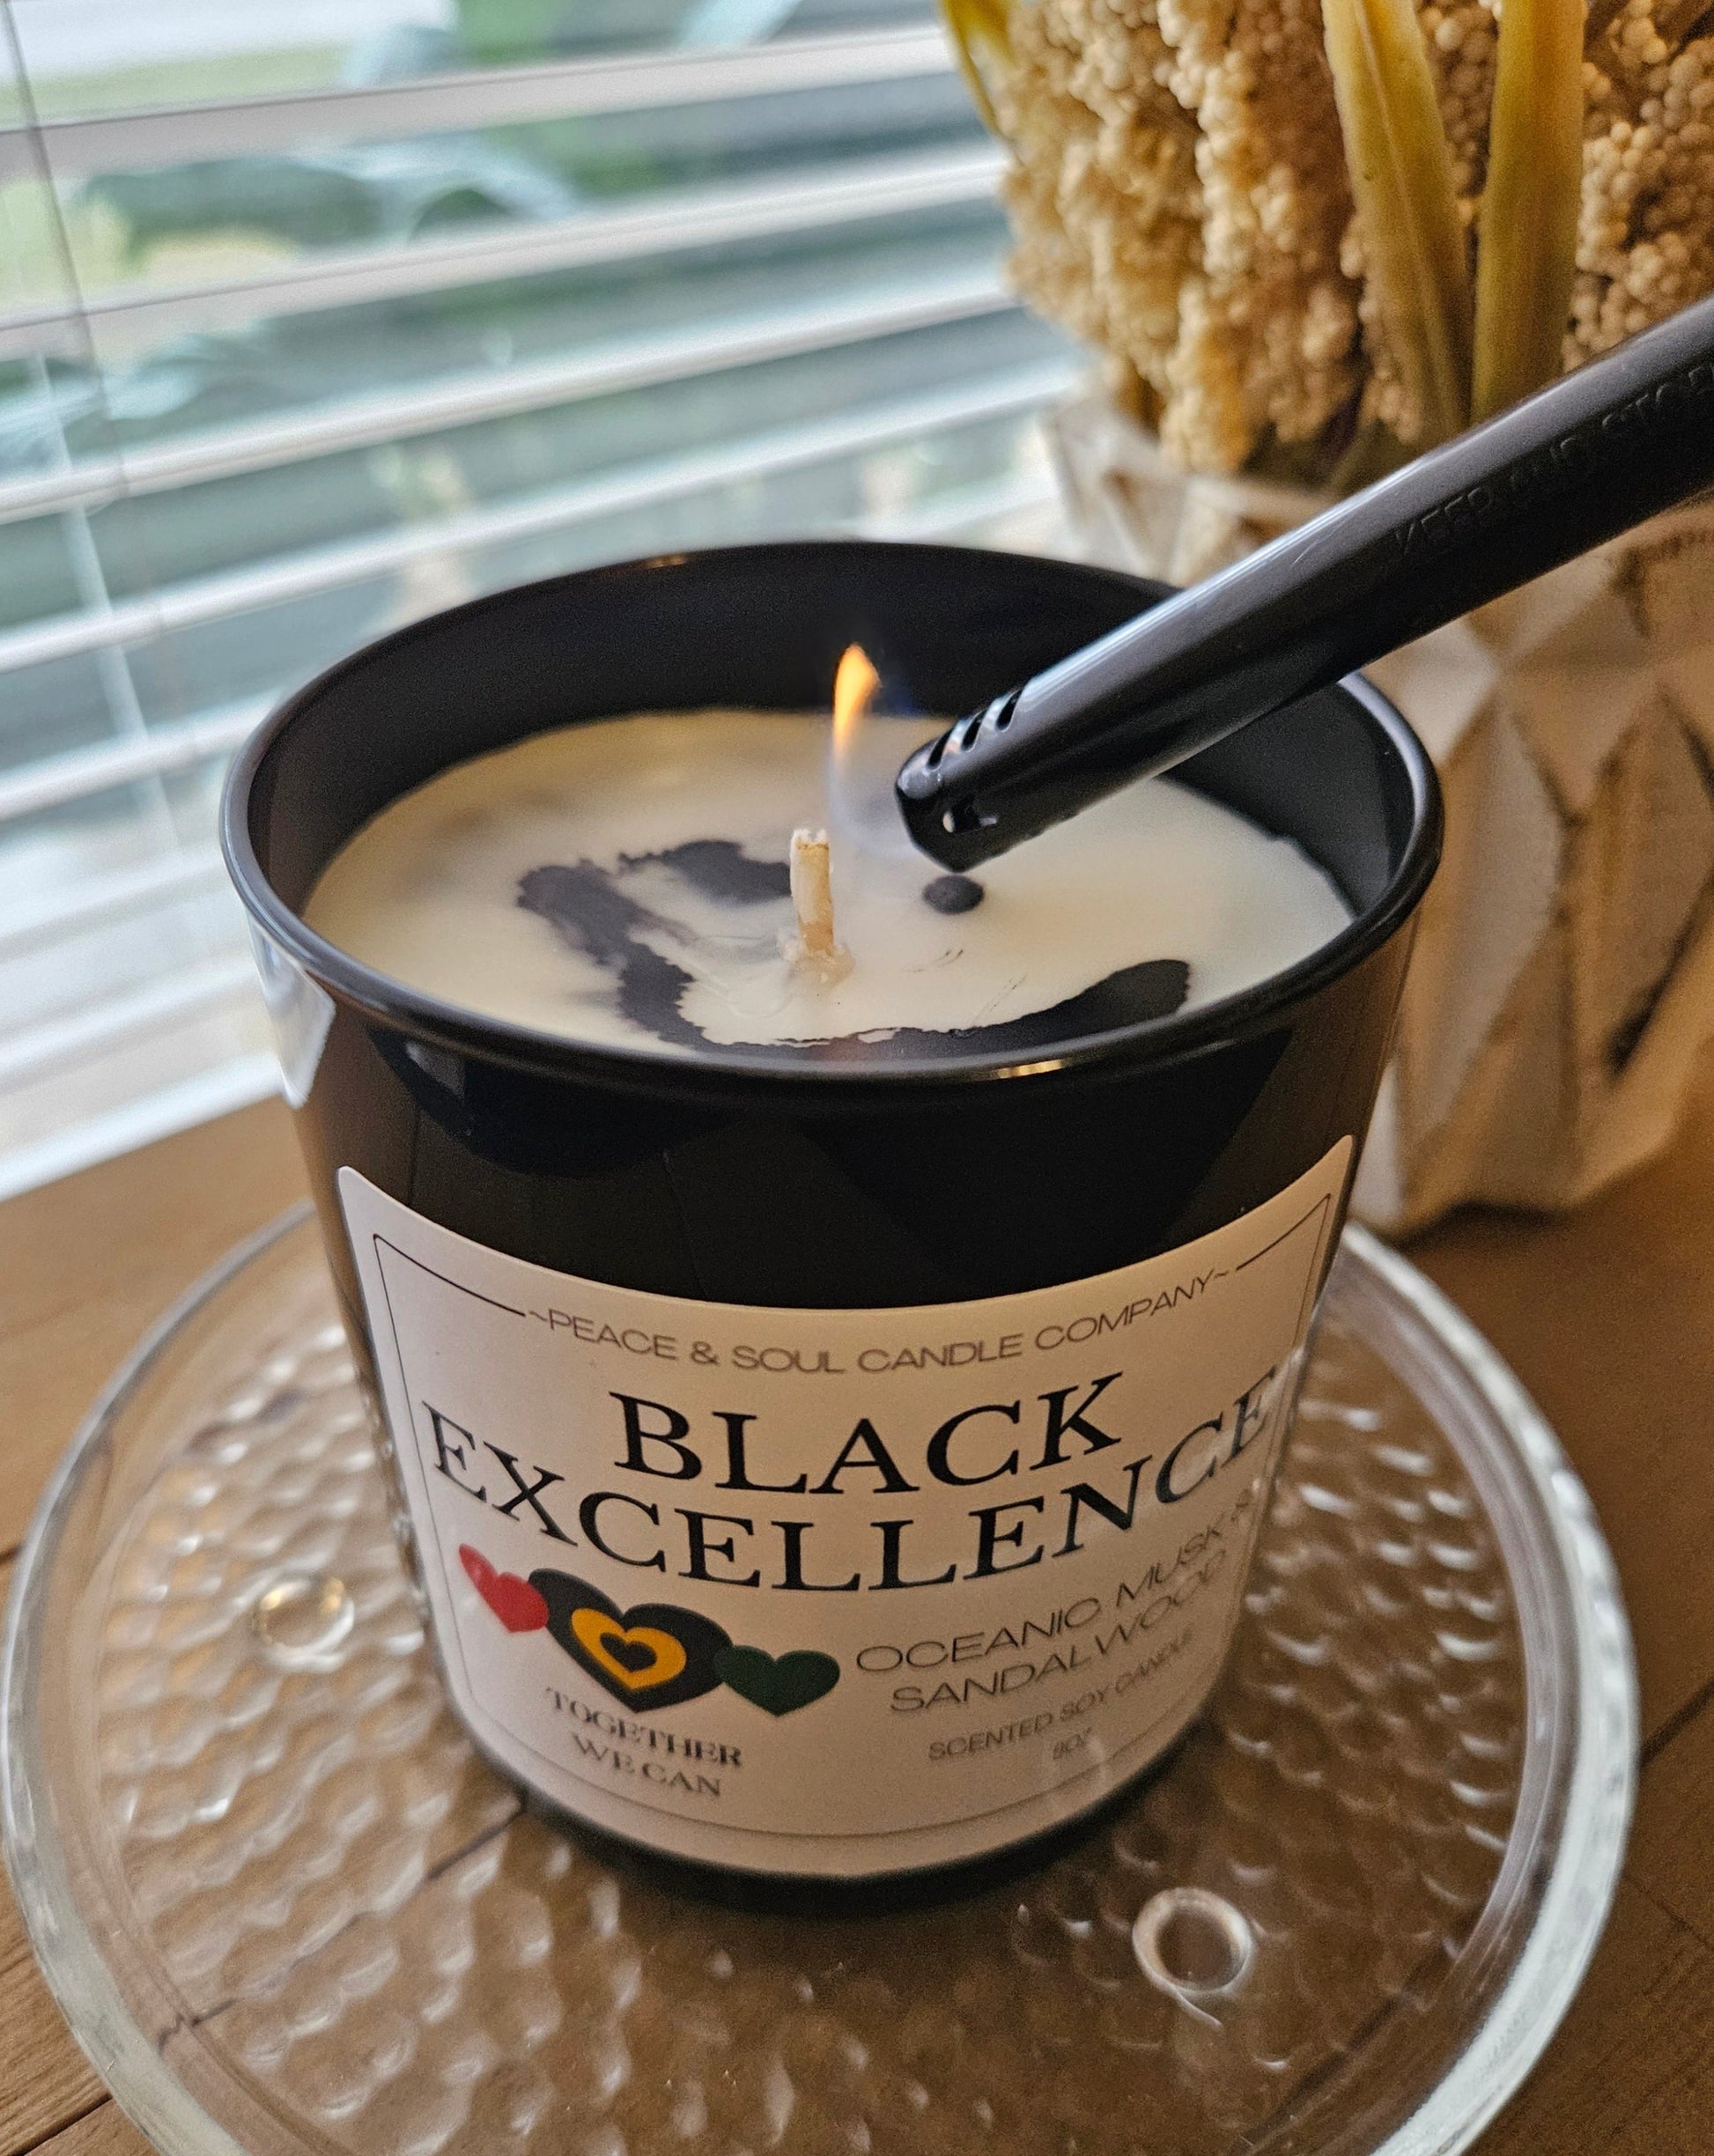 black candle for black history month in black glass jar with white label decorated with red, green and yellow hearts. Lighter lighting the candle. candle is sitting on a desk with a view of the outside.